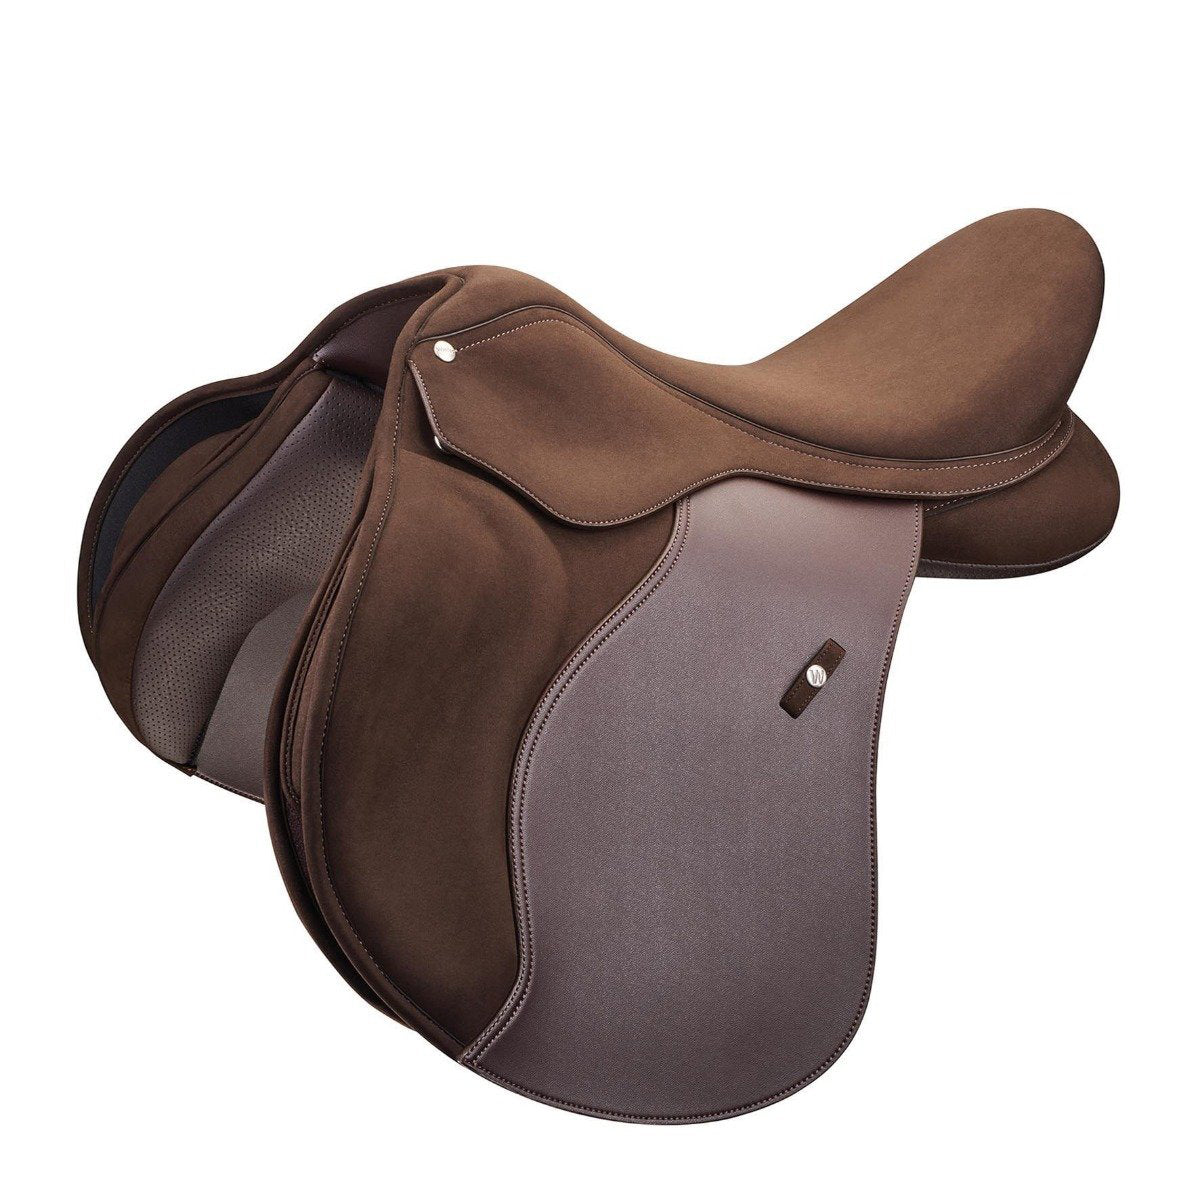 Wintec 2000 All Purpose Saddle with HART